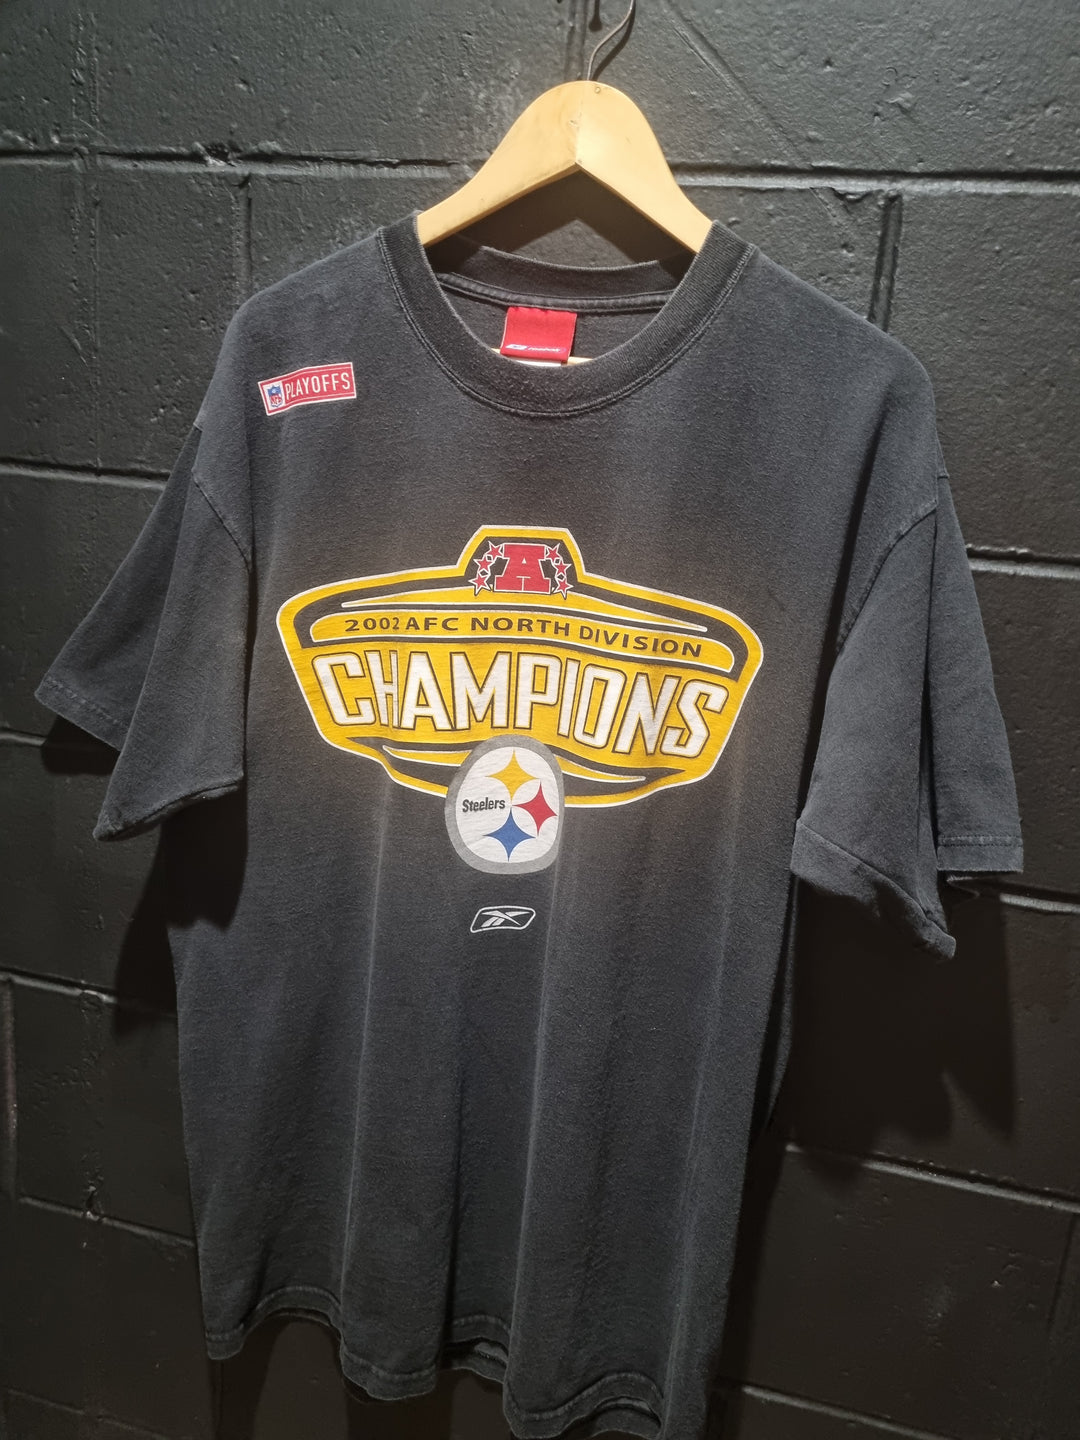 Steelers 2002 AFC North Division Champions Reebok XL